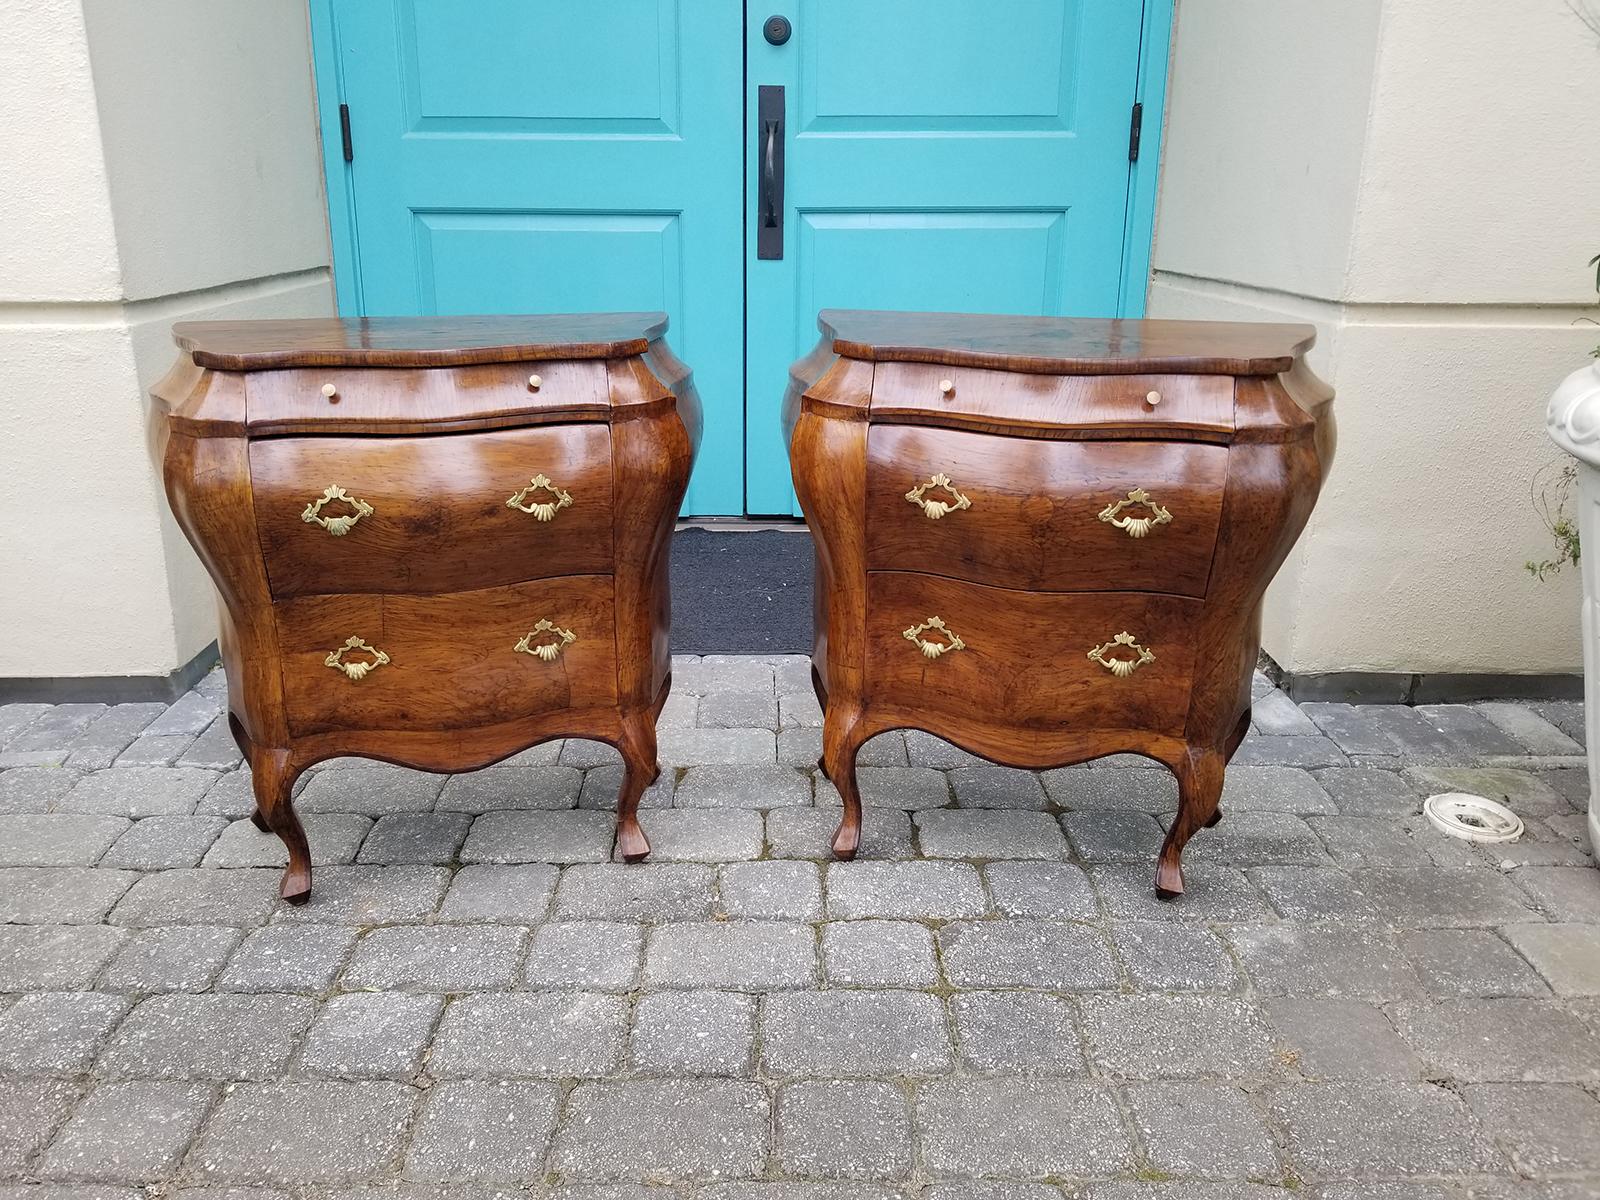 Pair of Mid-20th Century Italian Burled Olive Wood Bombe Form Three-Drawer Bedside Commodes
Great storage, beautiful form. Graceful movement in the wood
Overall:28